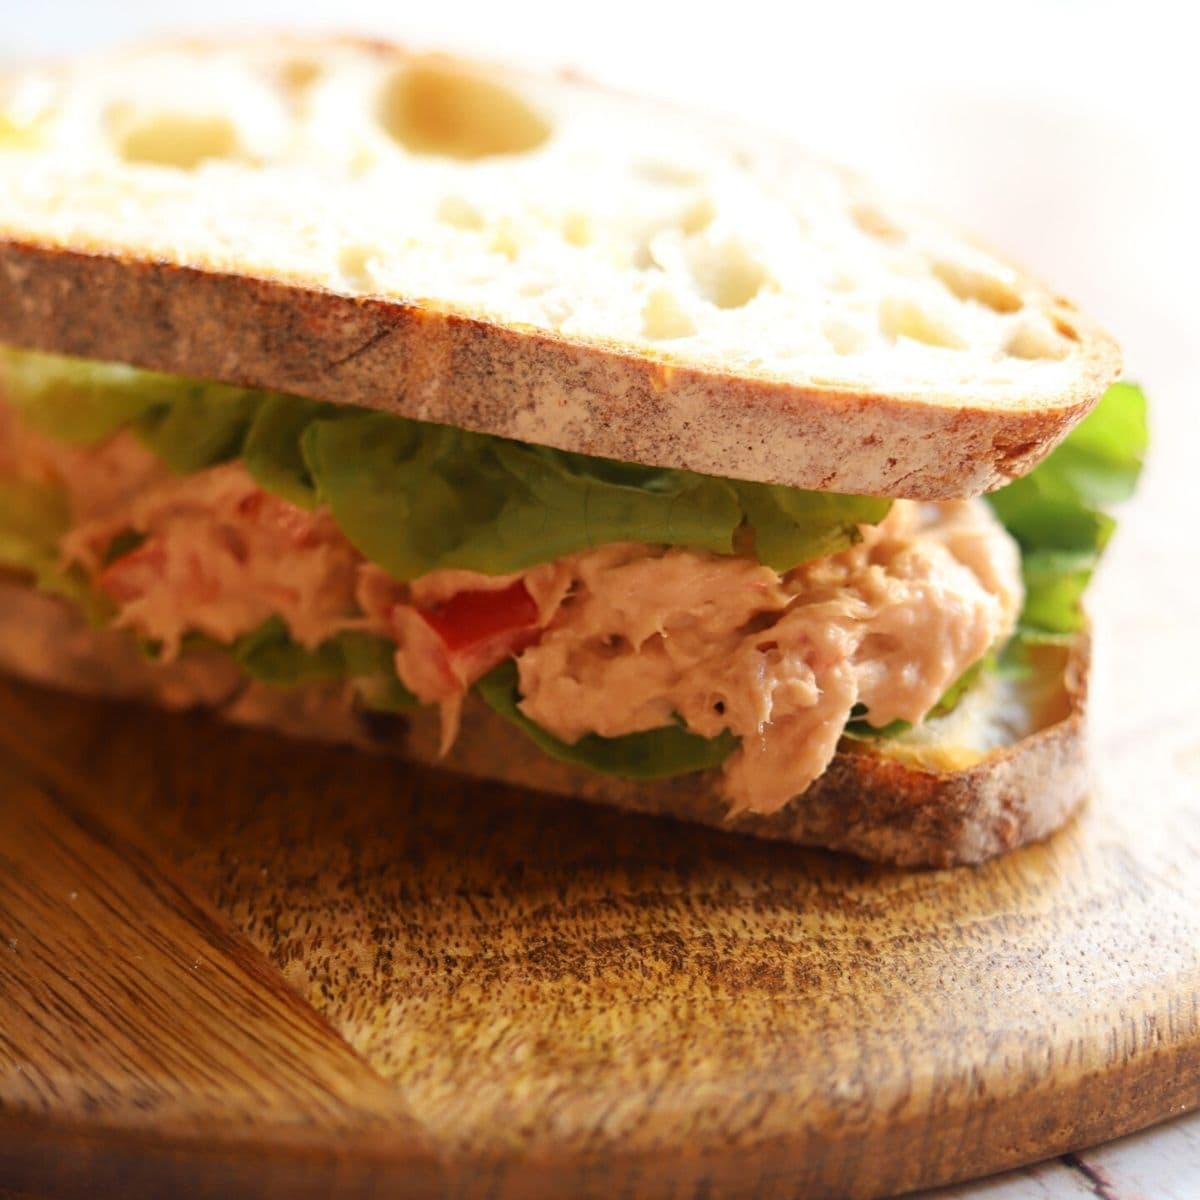 Sourdough bread sandwich filled with tuna mix and lettuce.